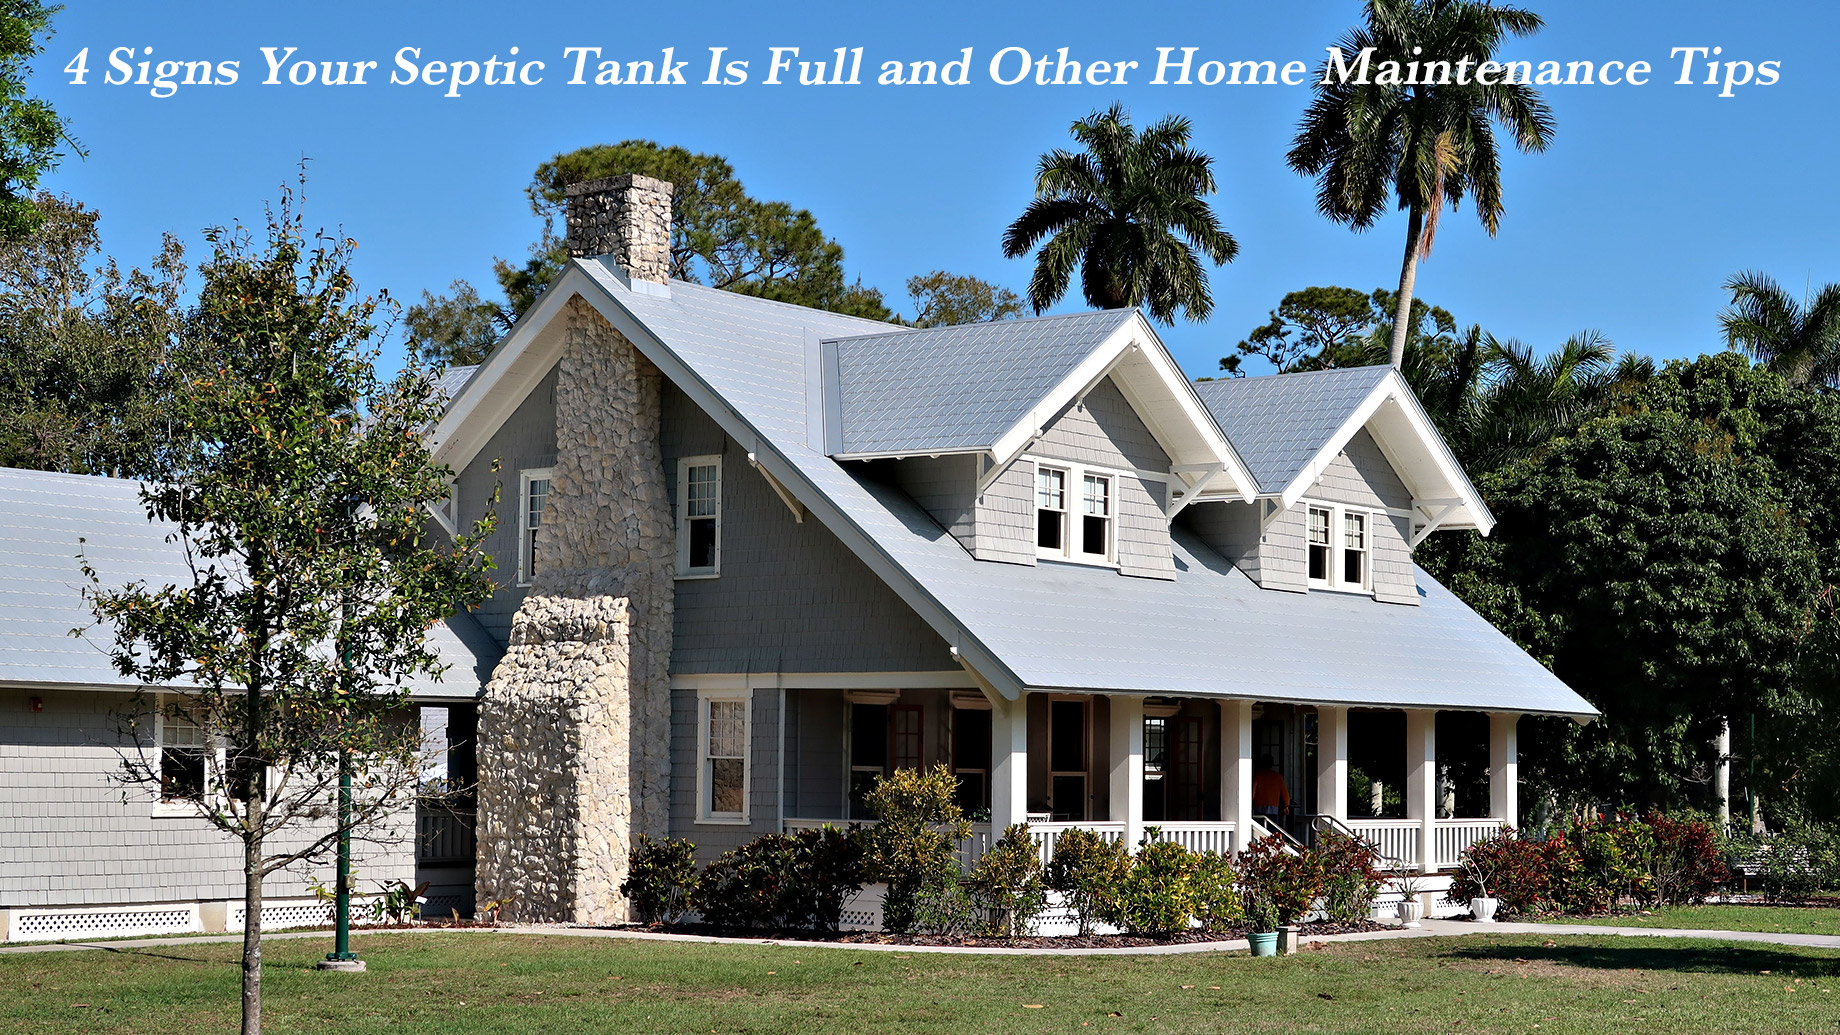 4 Signs Your Septic Tank Is Full and Other Home Maintenance Tips - The Pinnacle List